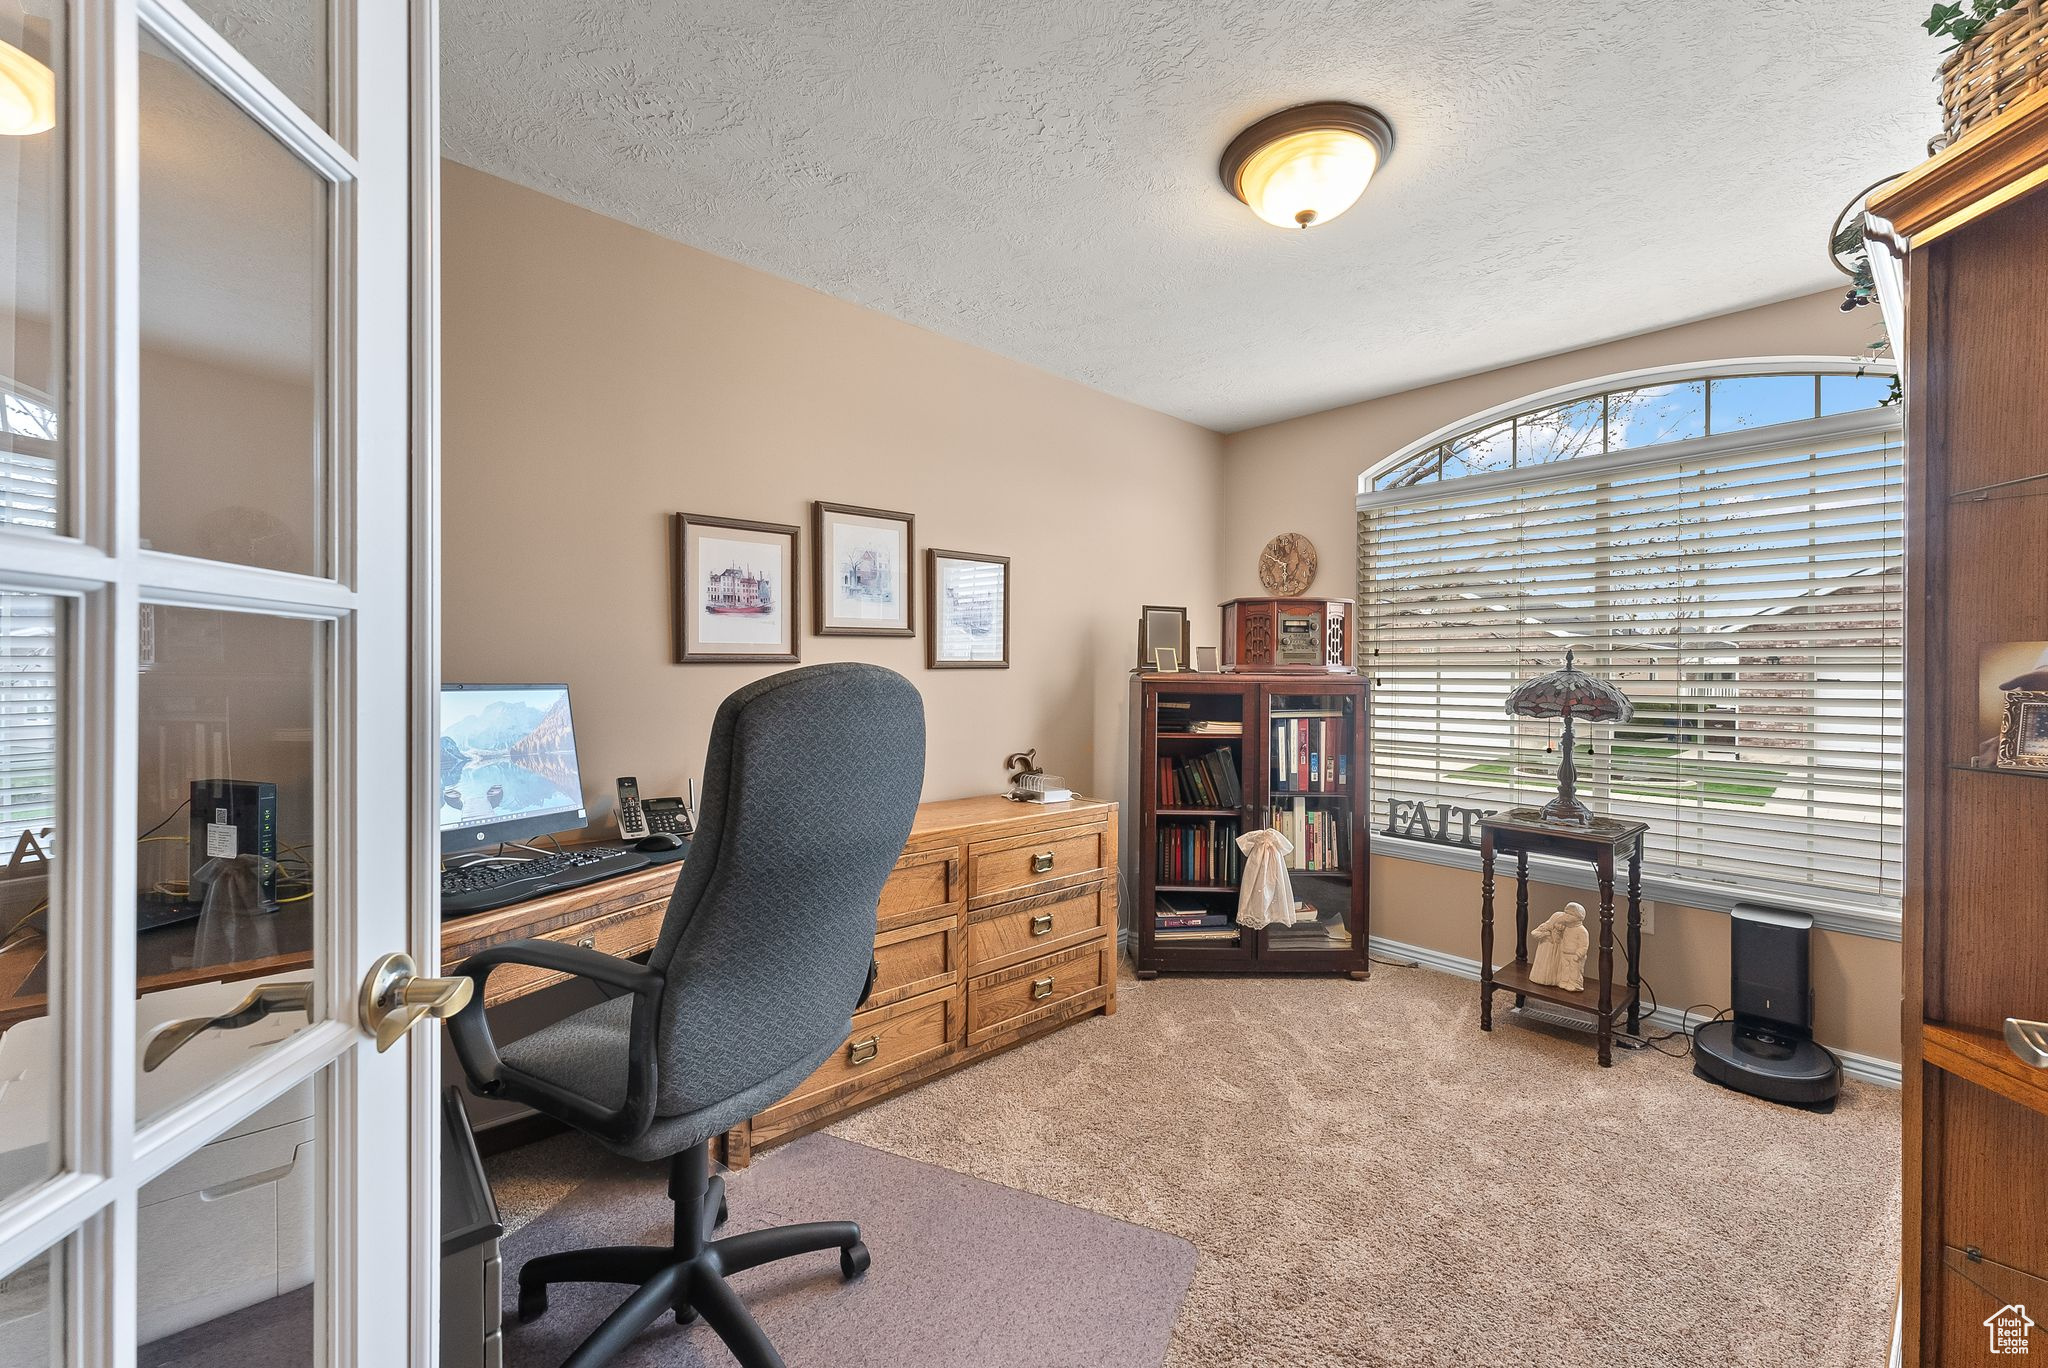 Office area featuring french doors, light carpet, and a textured ceiling